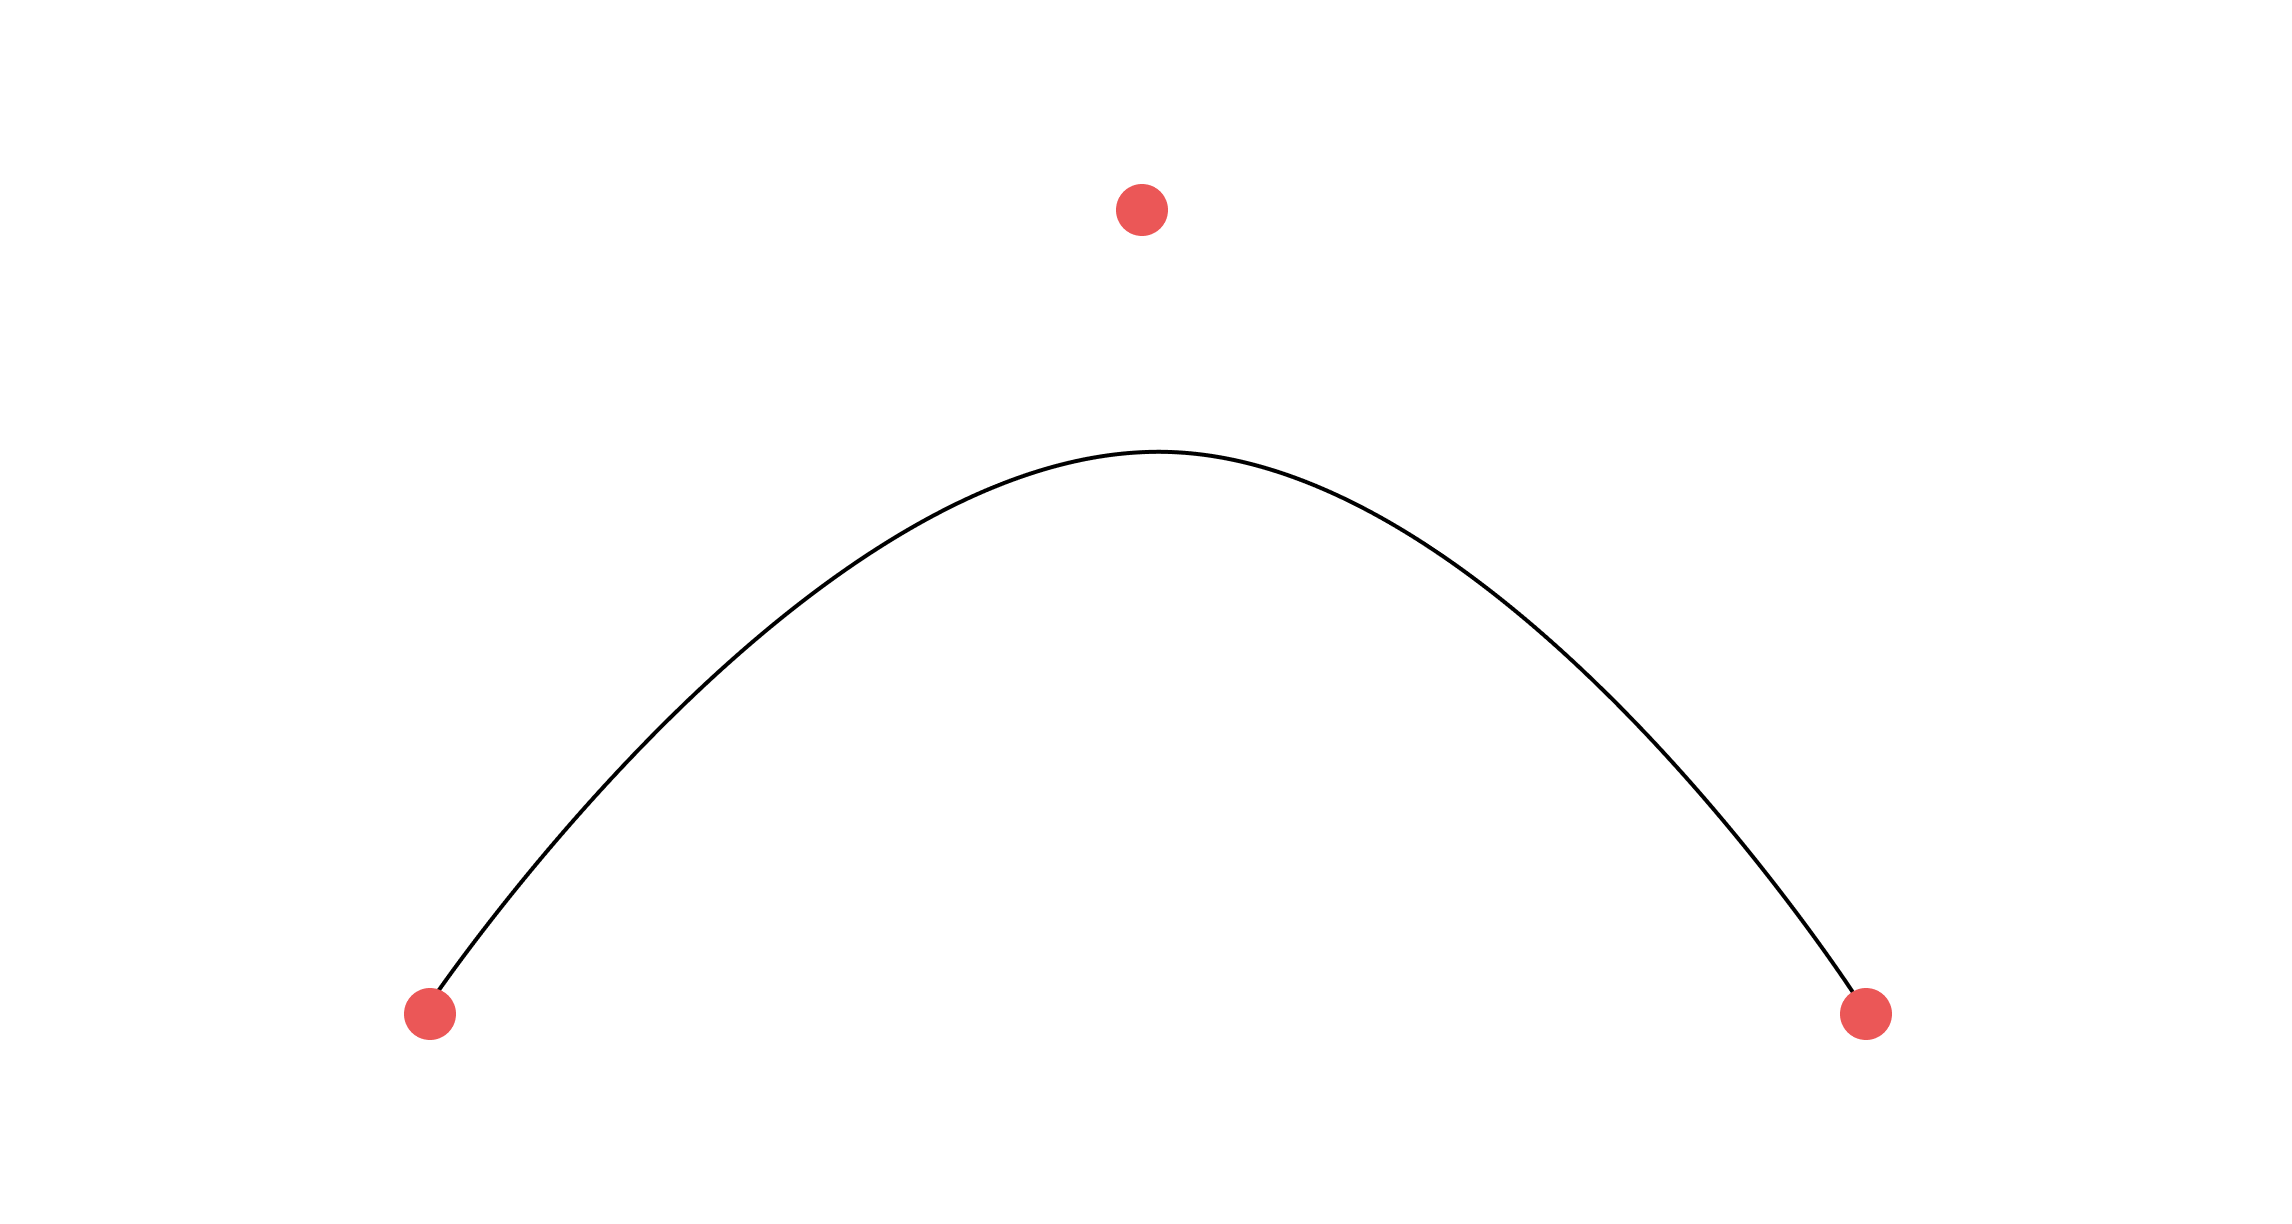 A quadratic Bézier curve, which has three control points. The true control point allows us to influence the curve.